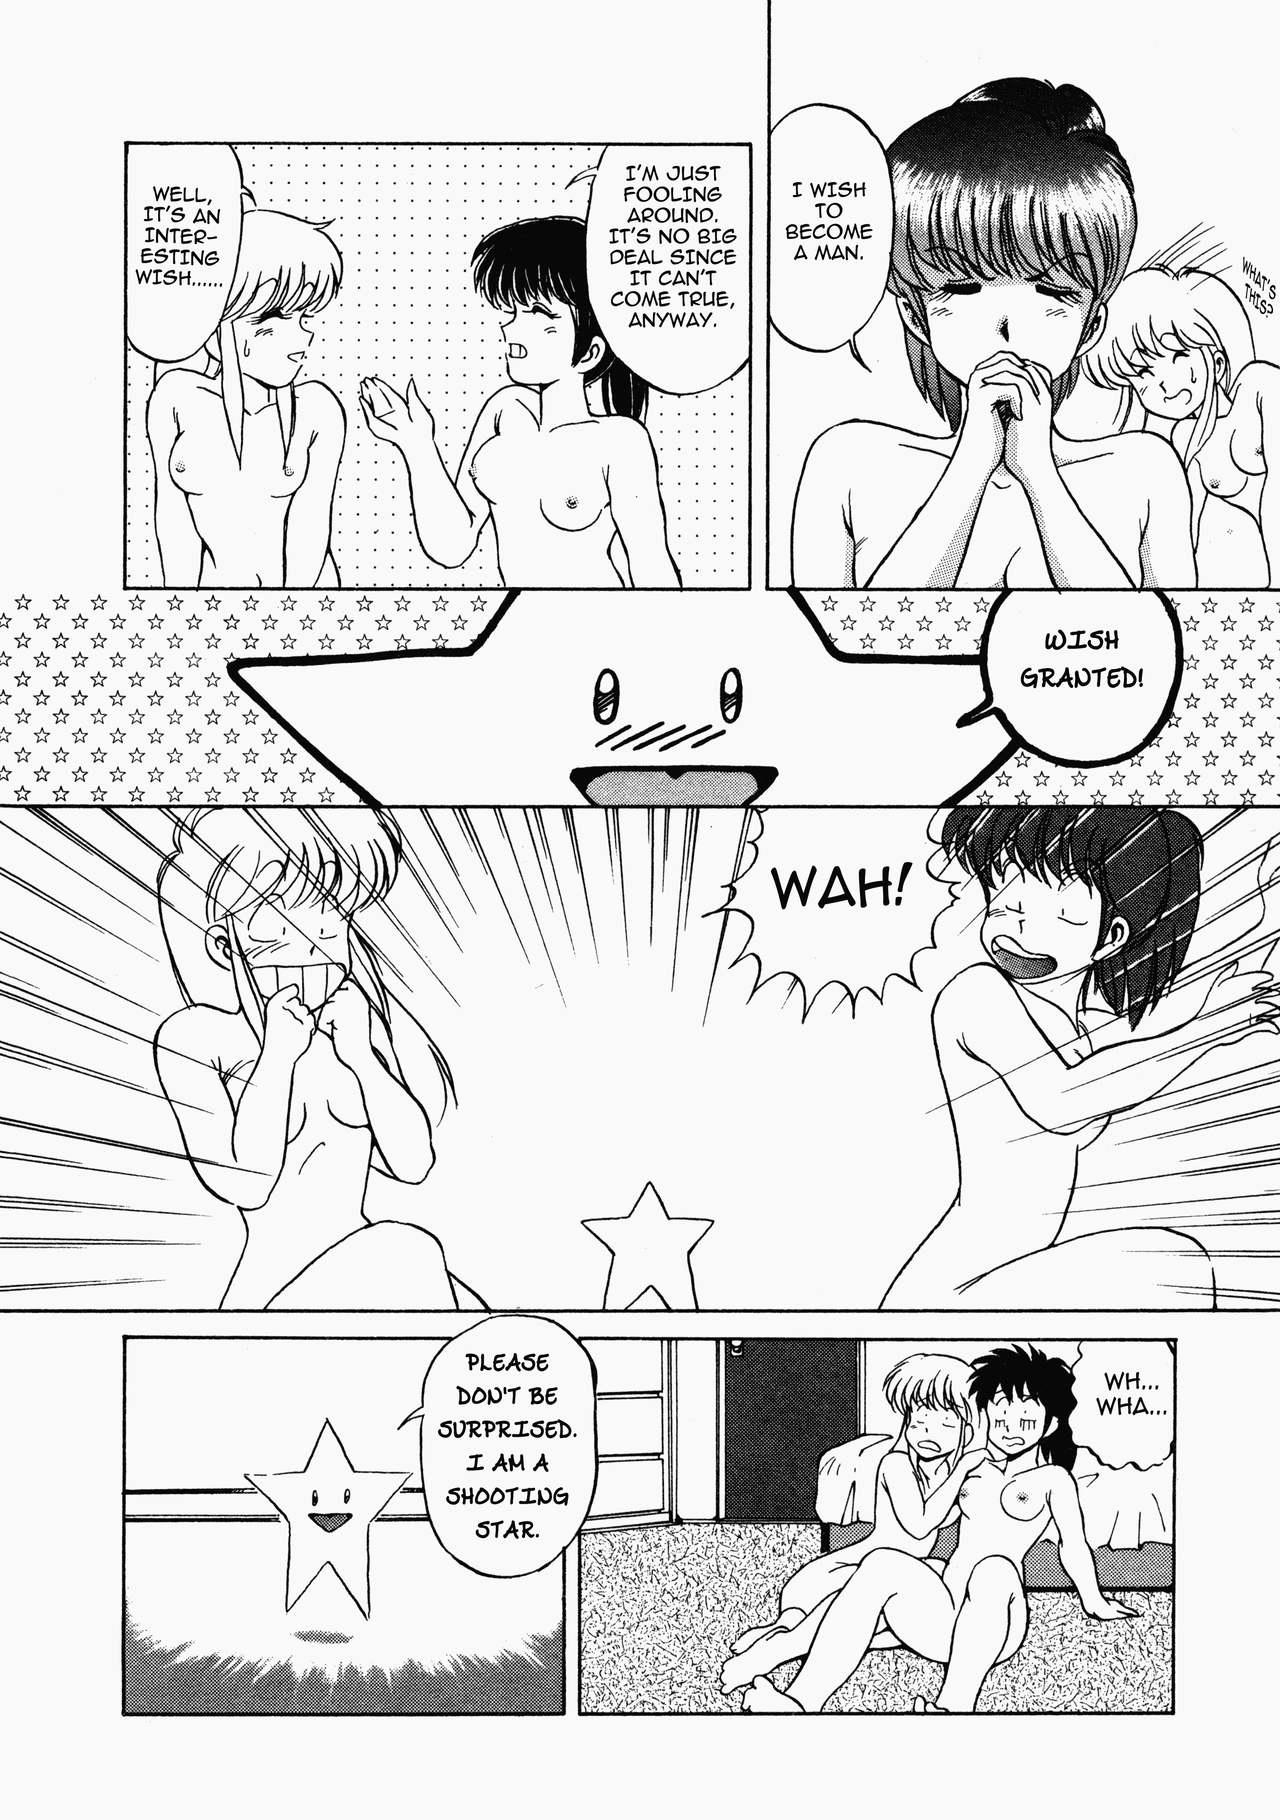 Lingerie Happening STAR prologue + Act 1 - 2 Punish - Page 10